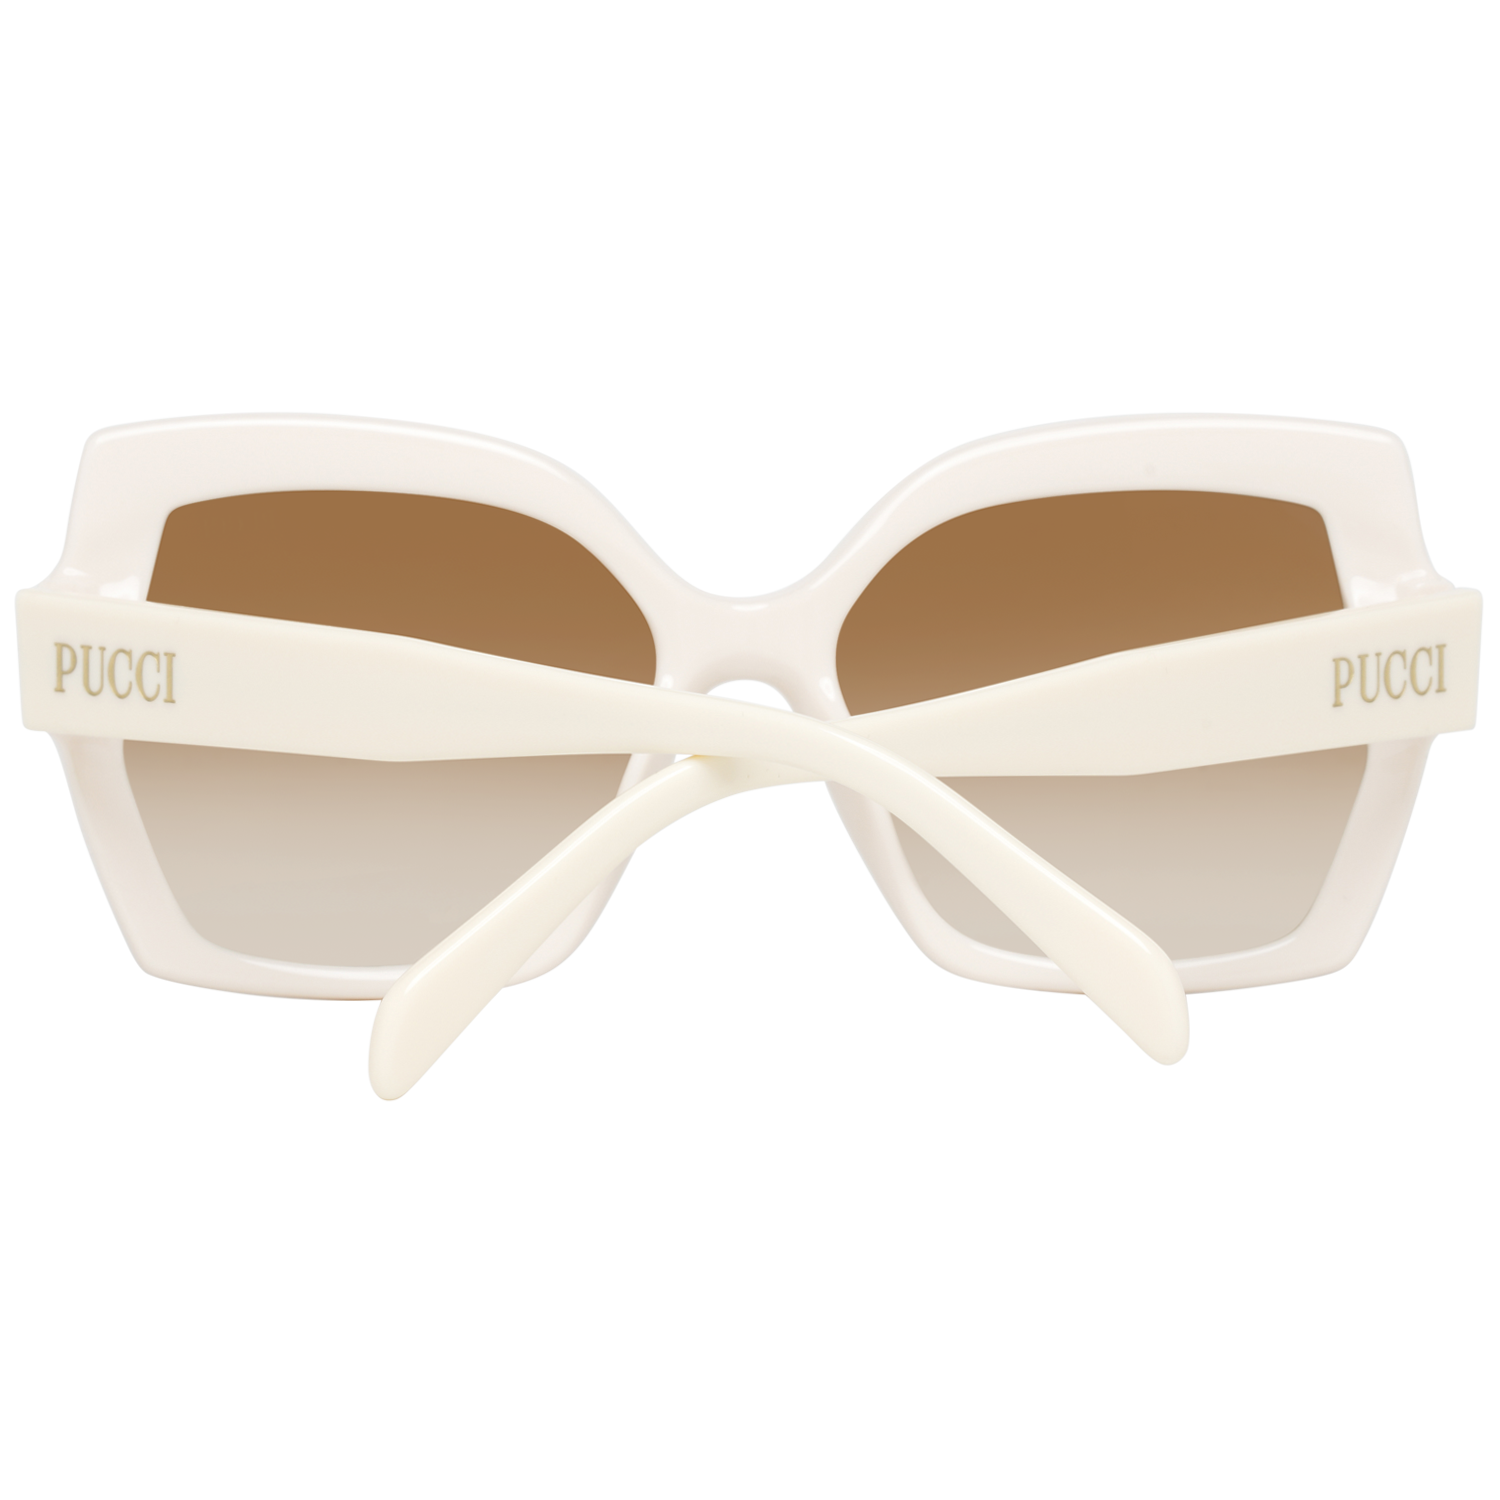 Emilio Pucci Sunglasses EP0140 24F 56 Women
Frame color: White
Lenses color: Brown
Lenses material: Plastic
Filter category: 2
Style: Square
Lenses effect: Gradient
Protection: 100% UVA & UVB
Size: 56-17-140
Lenses width: 56
Lenses height: 50
Bridge width: 17
Frame width: 144
Temples length: 140
Shipment includes: Case, cleaning cloth
Spring hinge: No